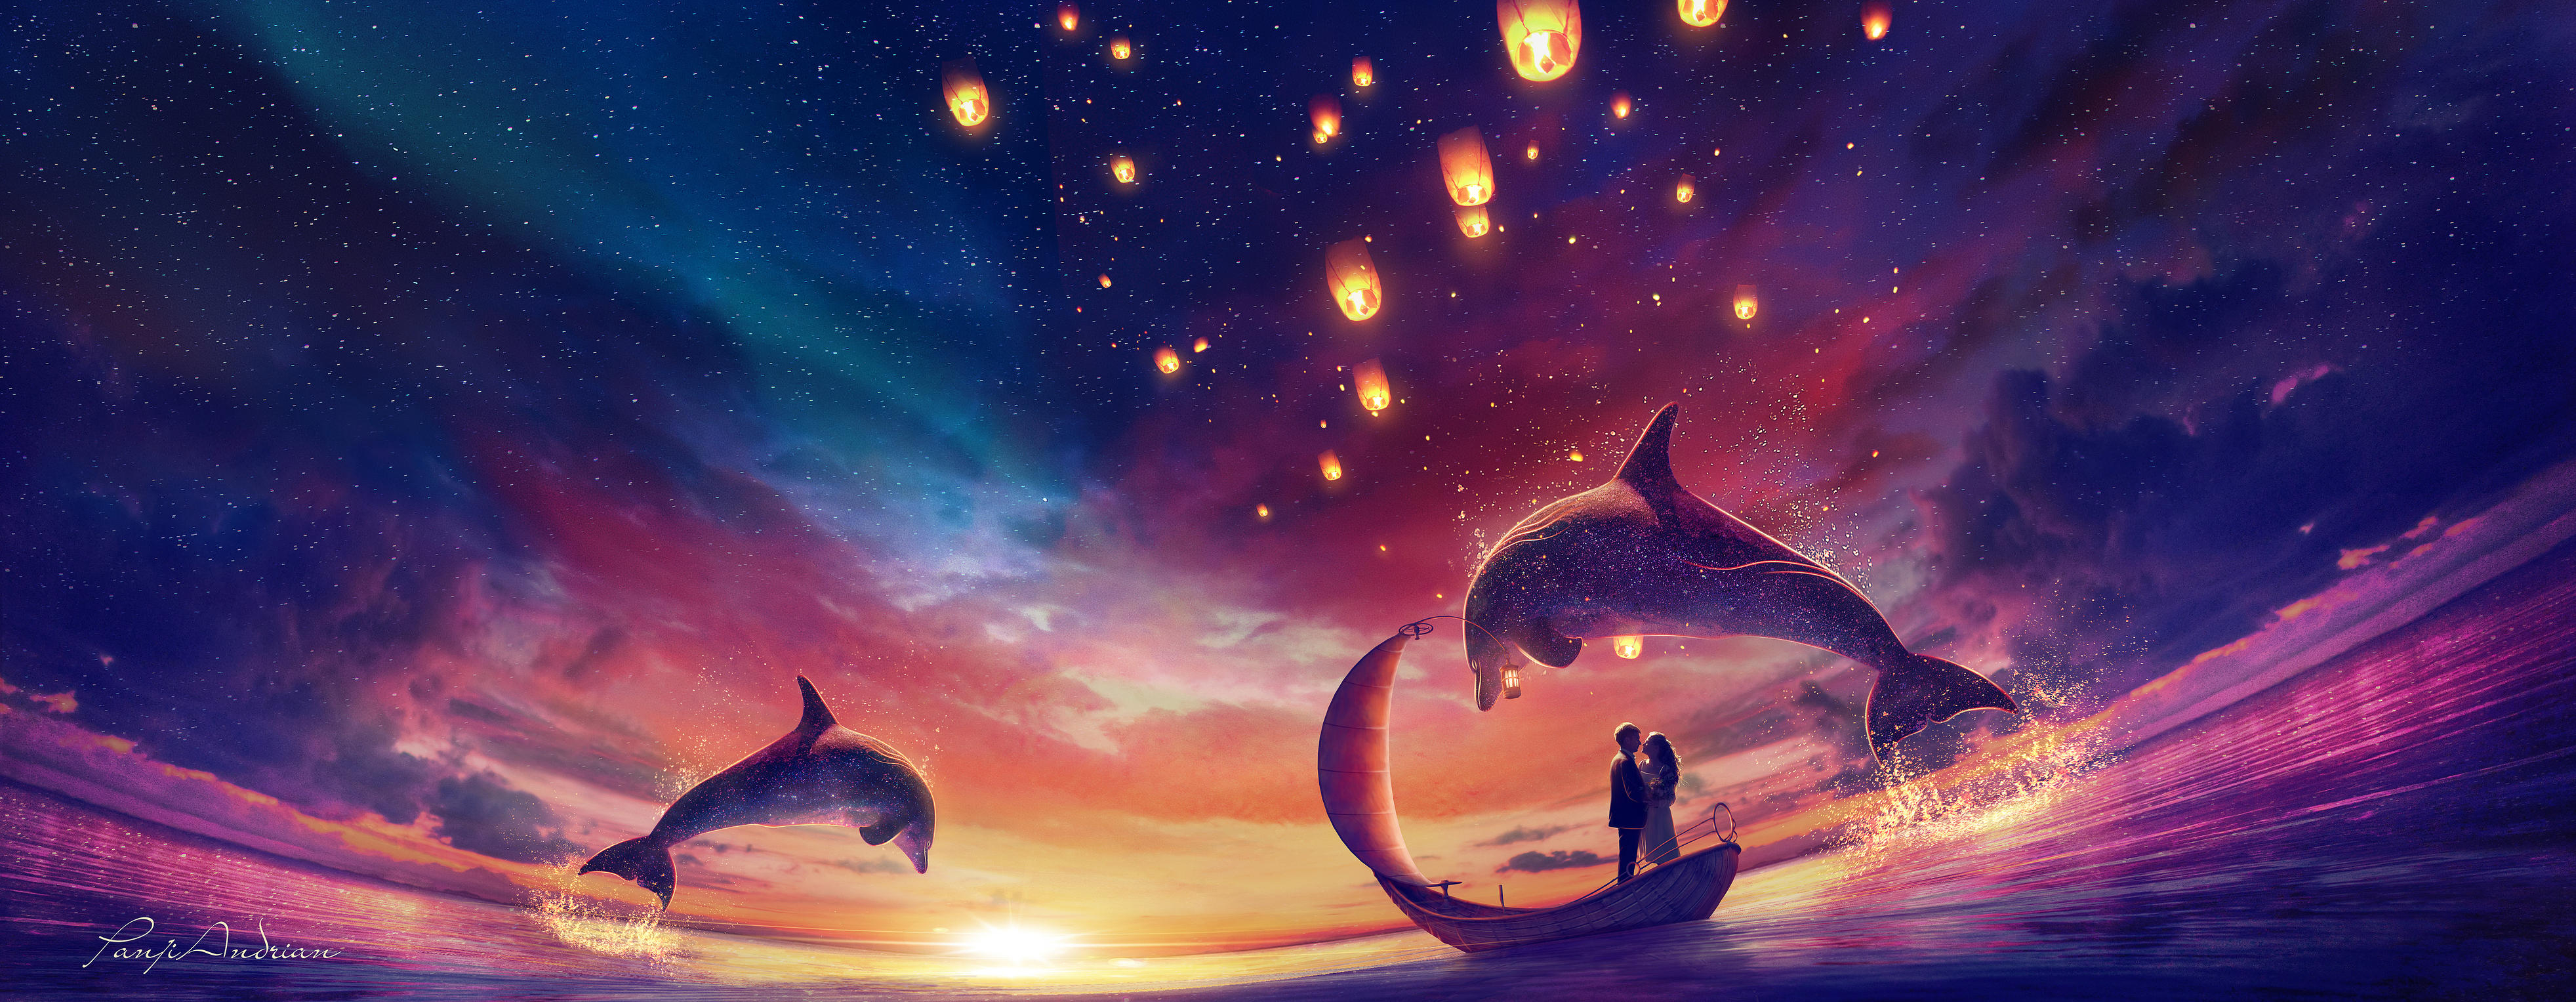 General 3927x1527 digital digital art artwork illustration drawing digital painting environment concept art dolphin animals dusk sunset Sun sun rays evening night landscape sky skyscape couple boat love romance lights water sea clouds nature outdoors dreamscape